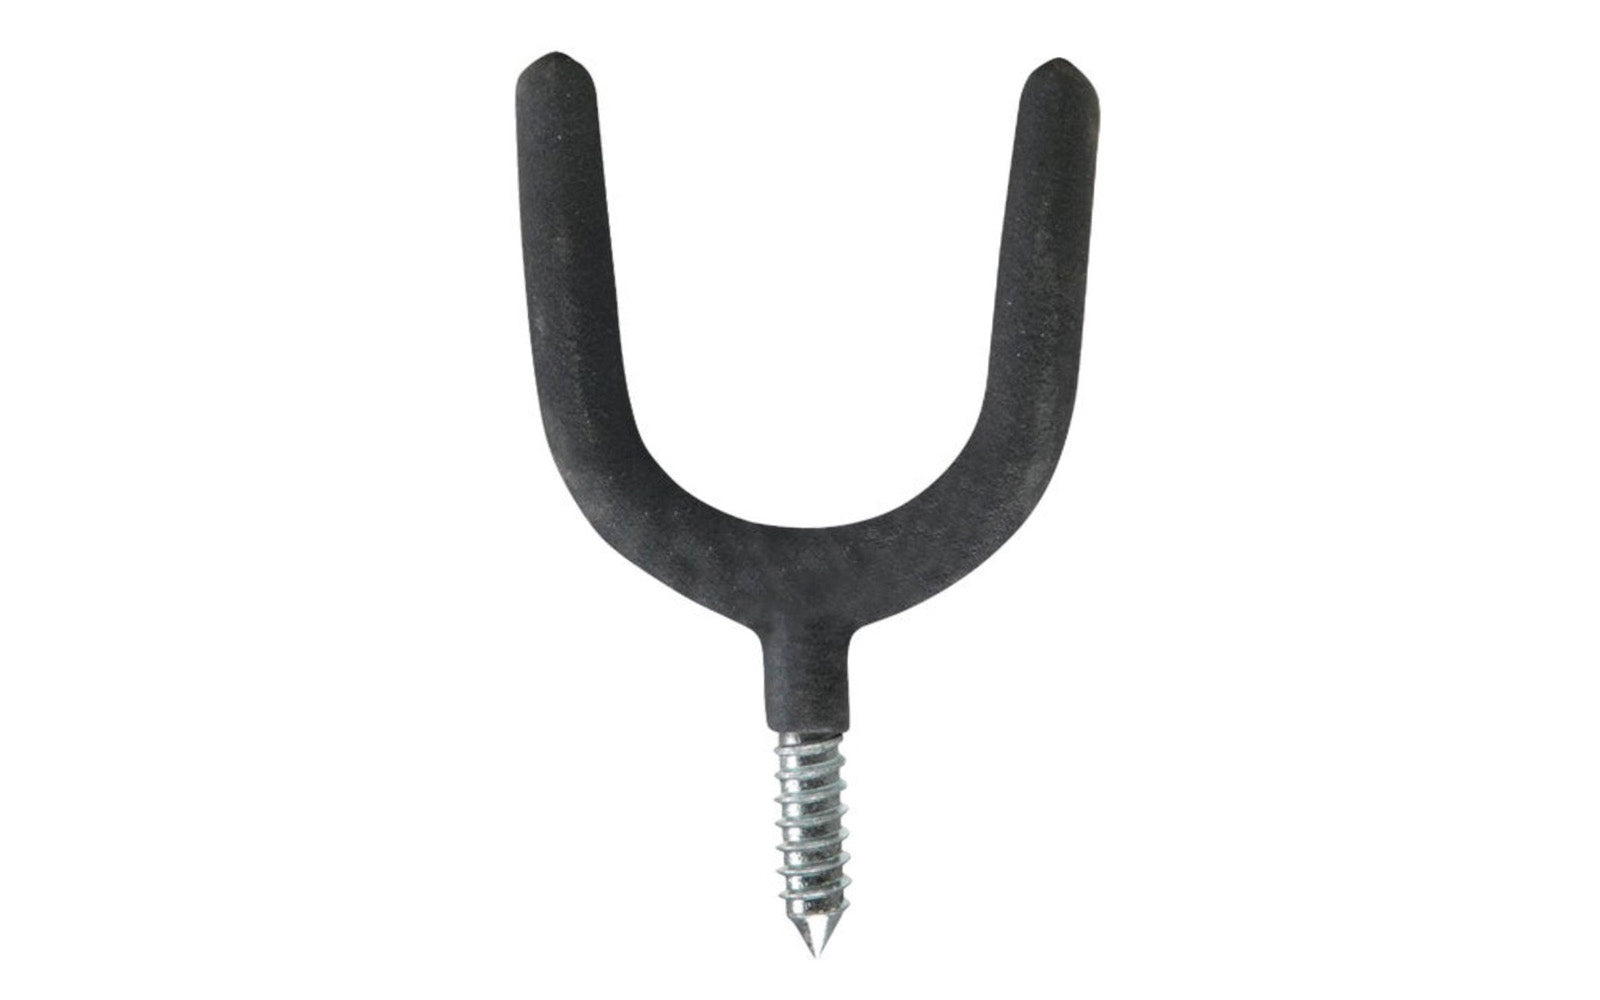 Heavy Duty Vinyl Coated Tool Holder Hook. This heavy-duty double prong tool holder hook is designed to hold up to 50 lbs. Hanger has a tough no-mar vinyl-coating. HD screw-in two prong hook. 009326208879